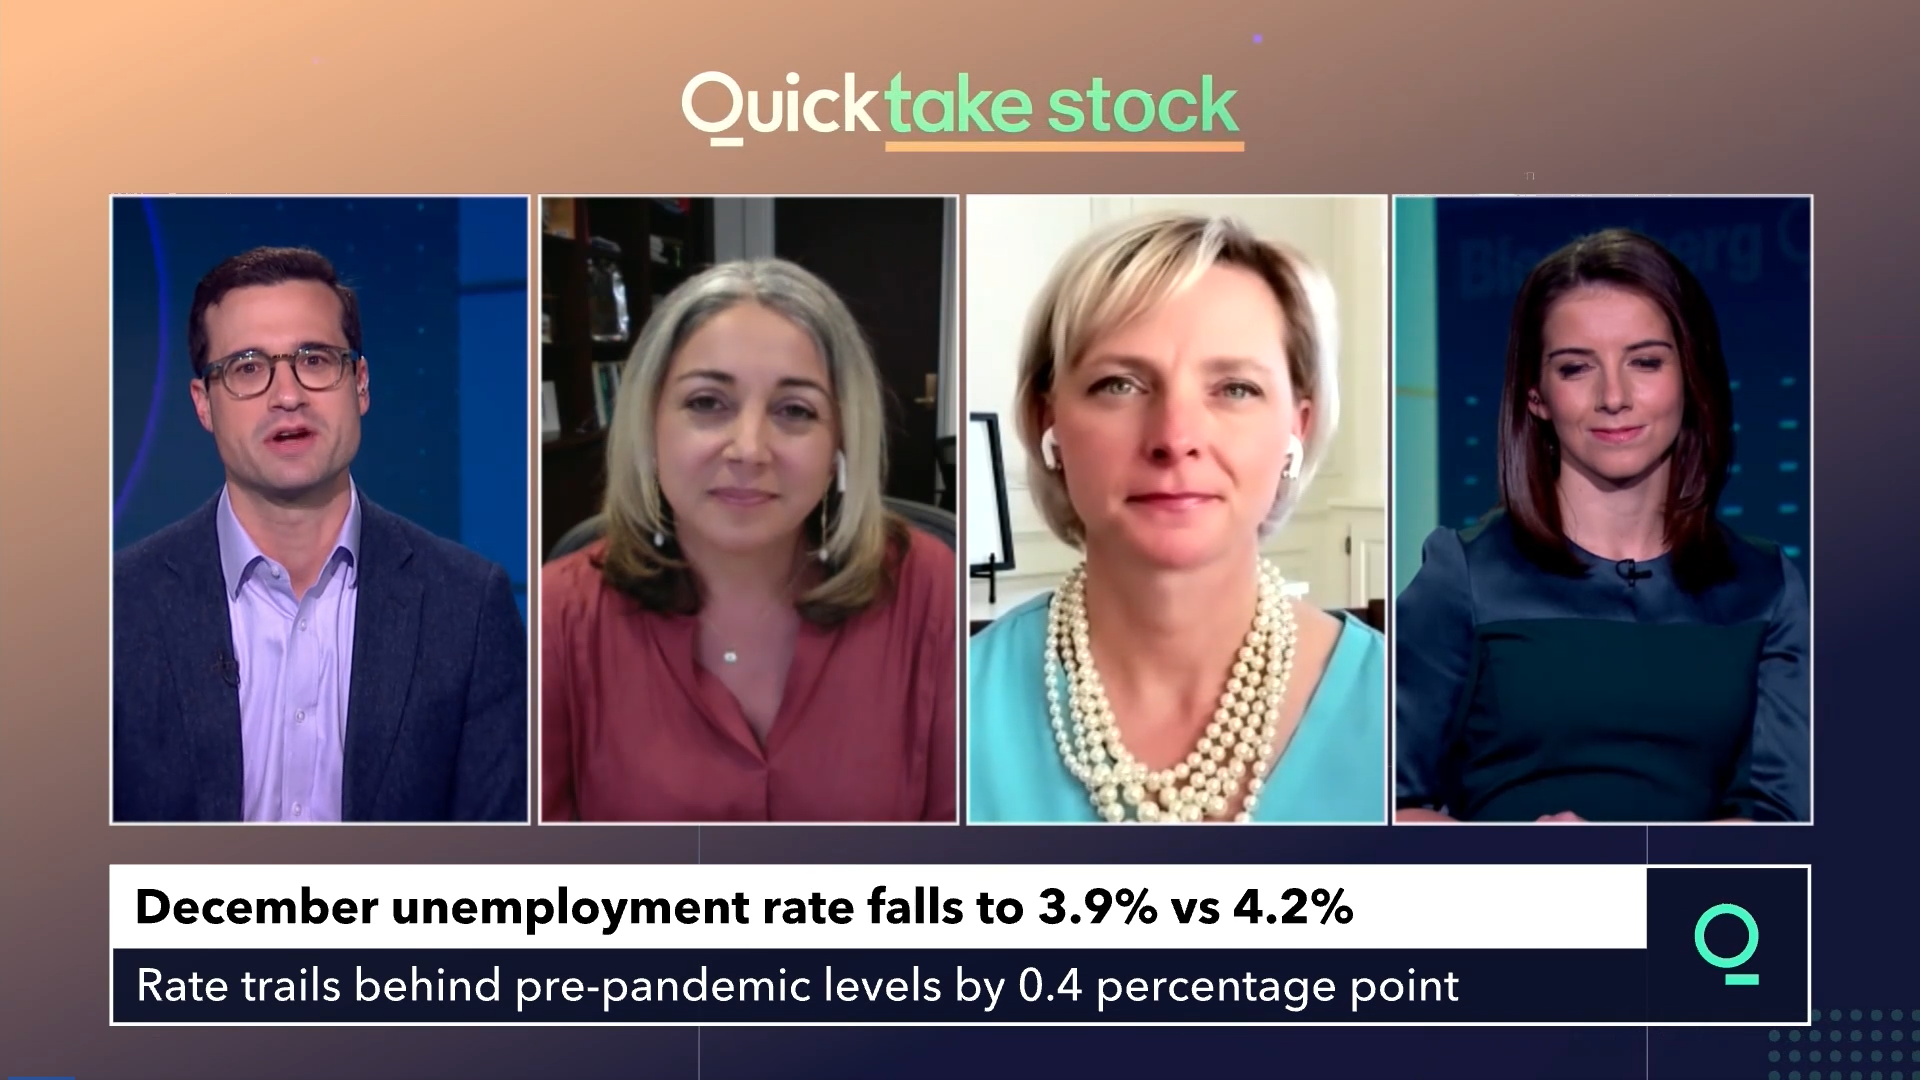 Dean Sevin Yeltekin of Simon Business School appeared as a panelist on a recent episode of Bloomberg TV's QuickTake